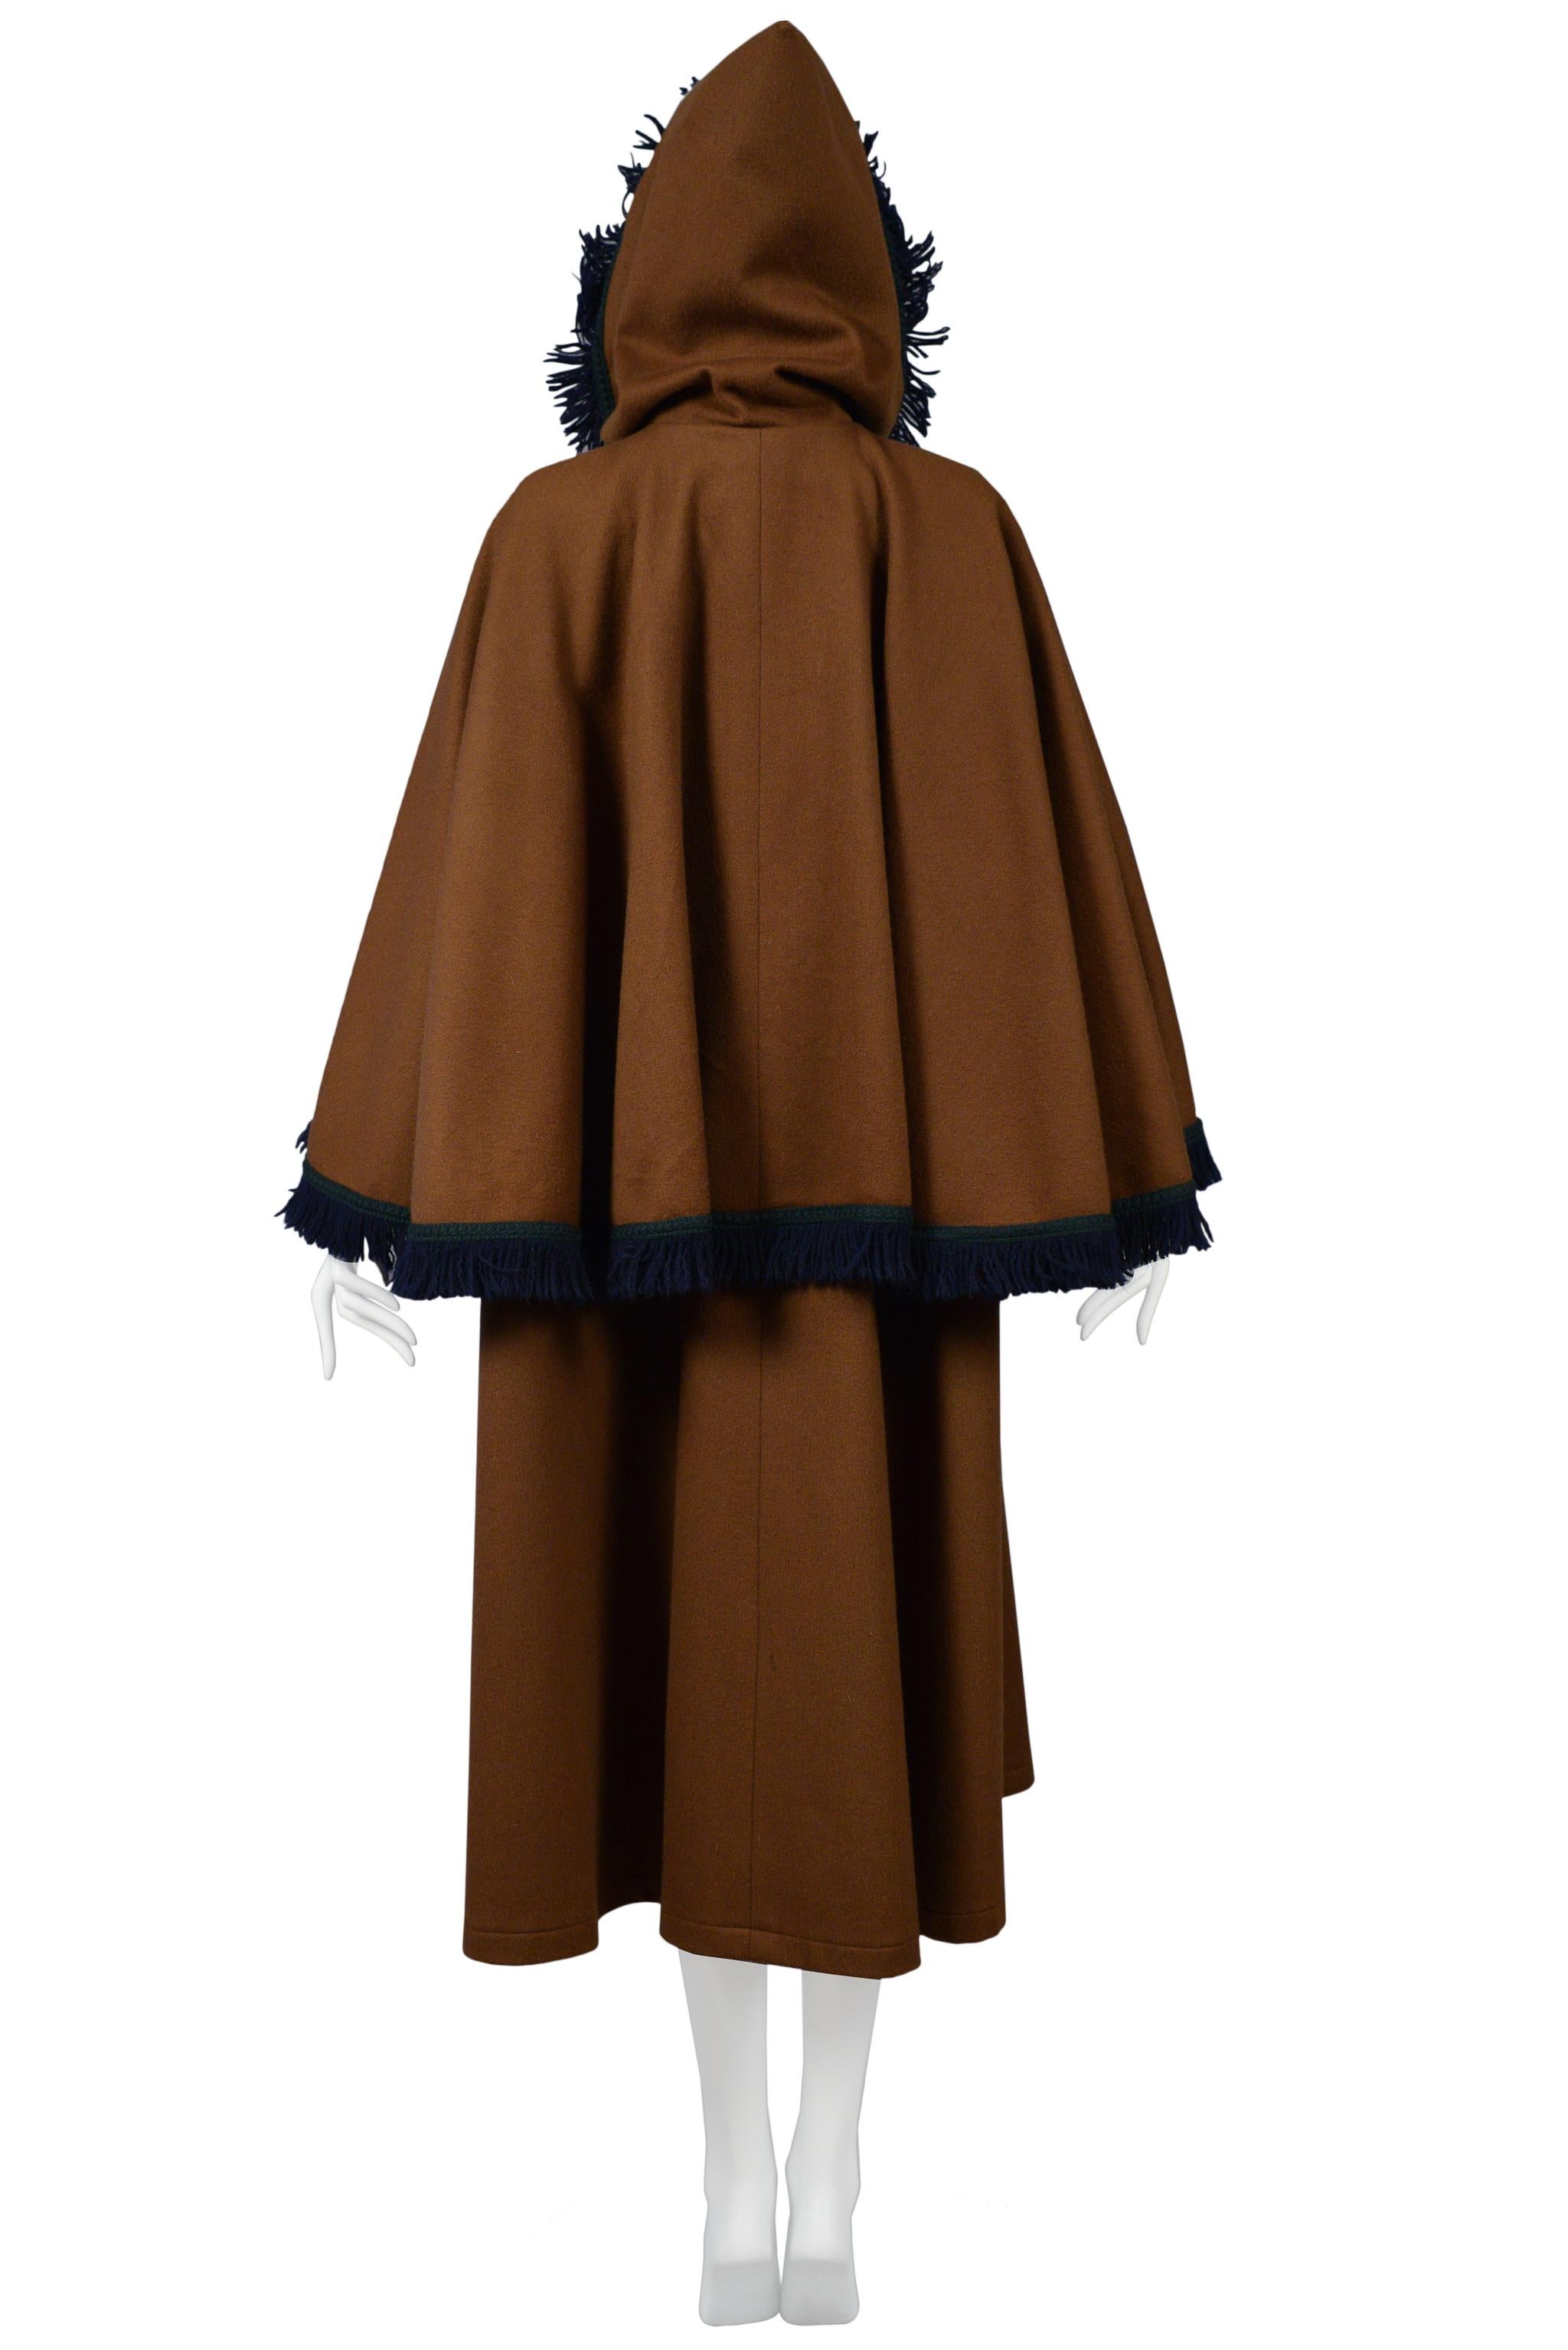 Yves Saint Laurent YSL Caramel Brown Wool Cape Coat with Hood and Fringe  1